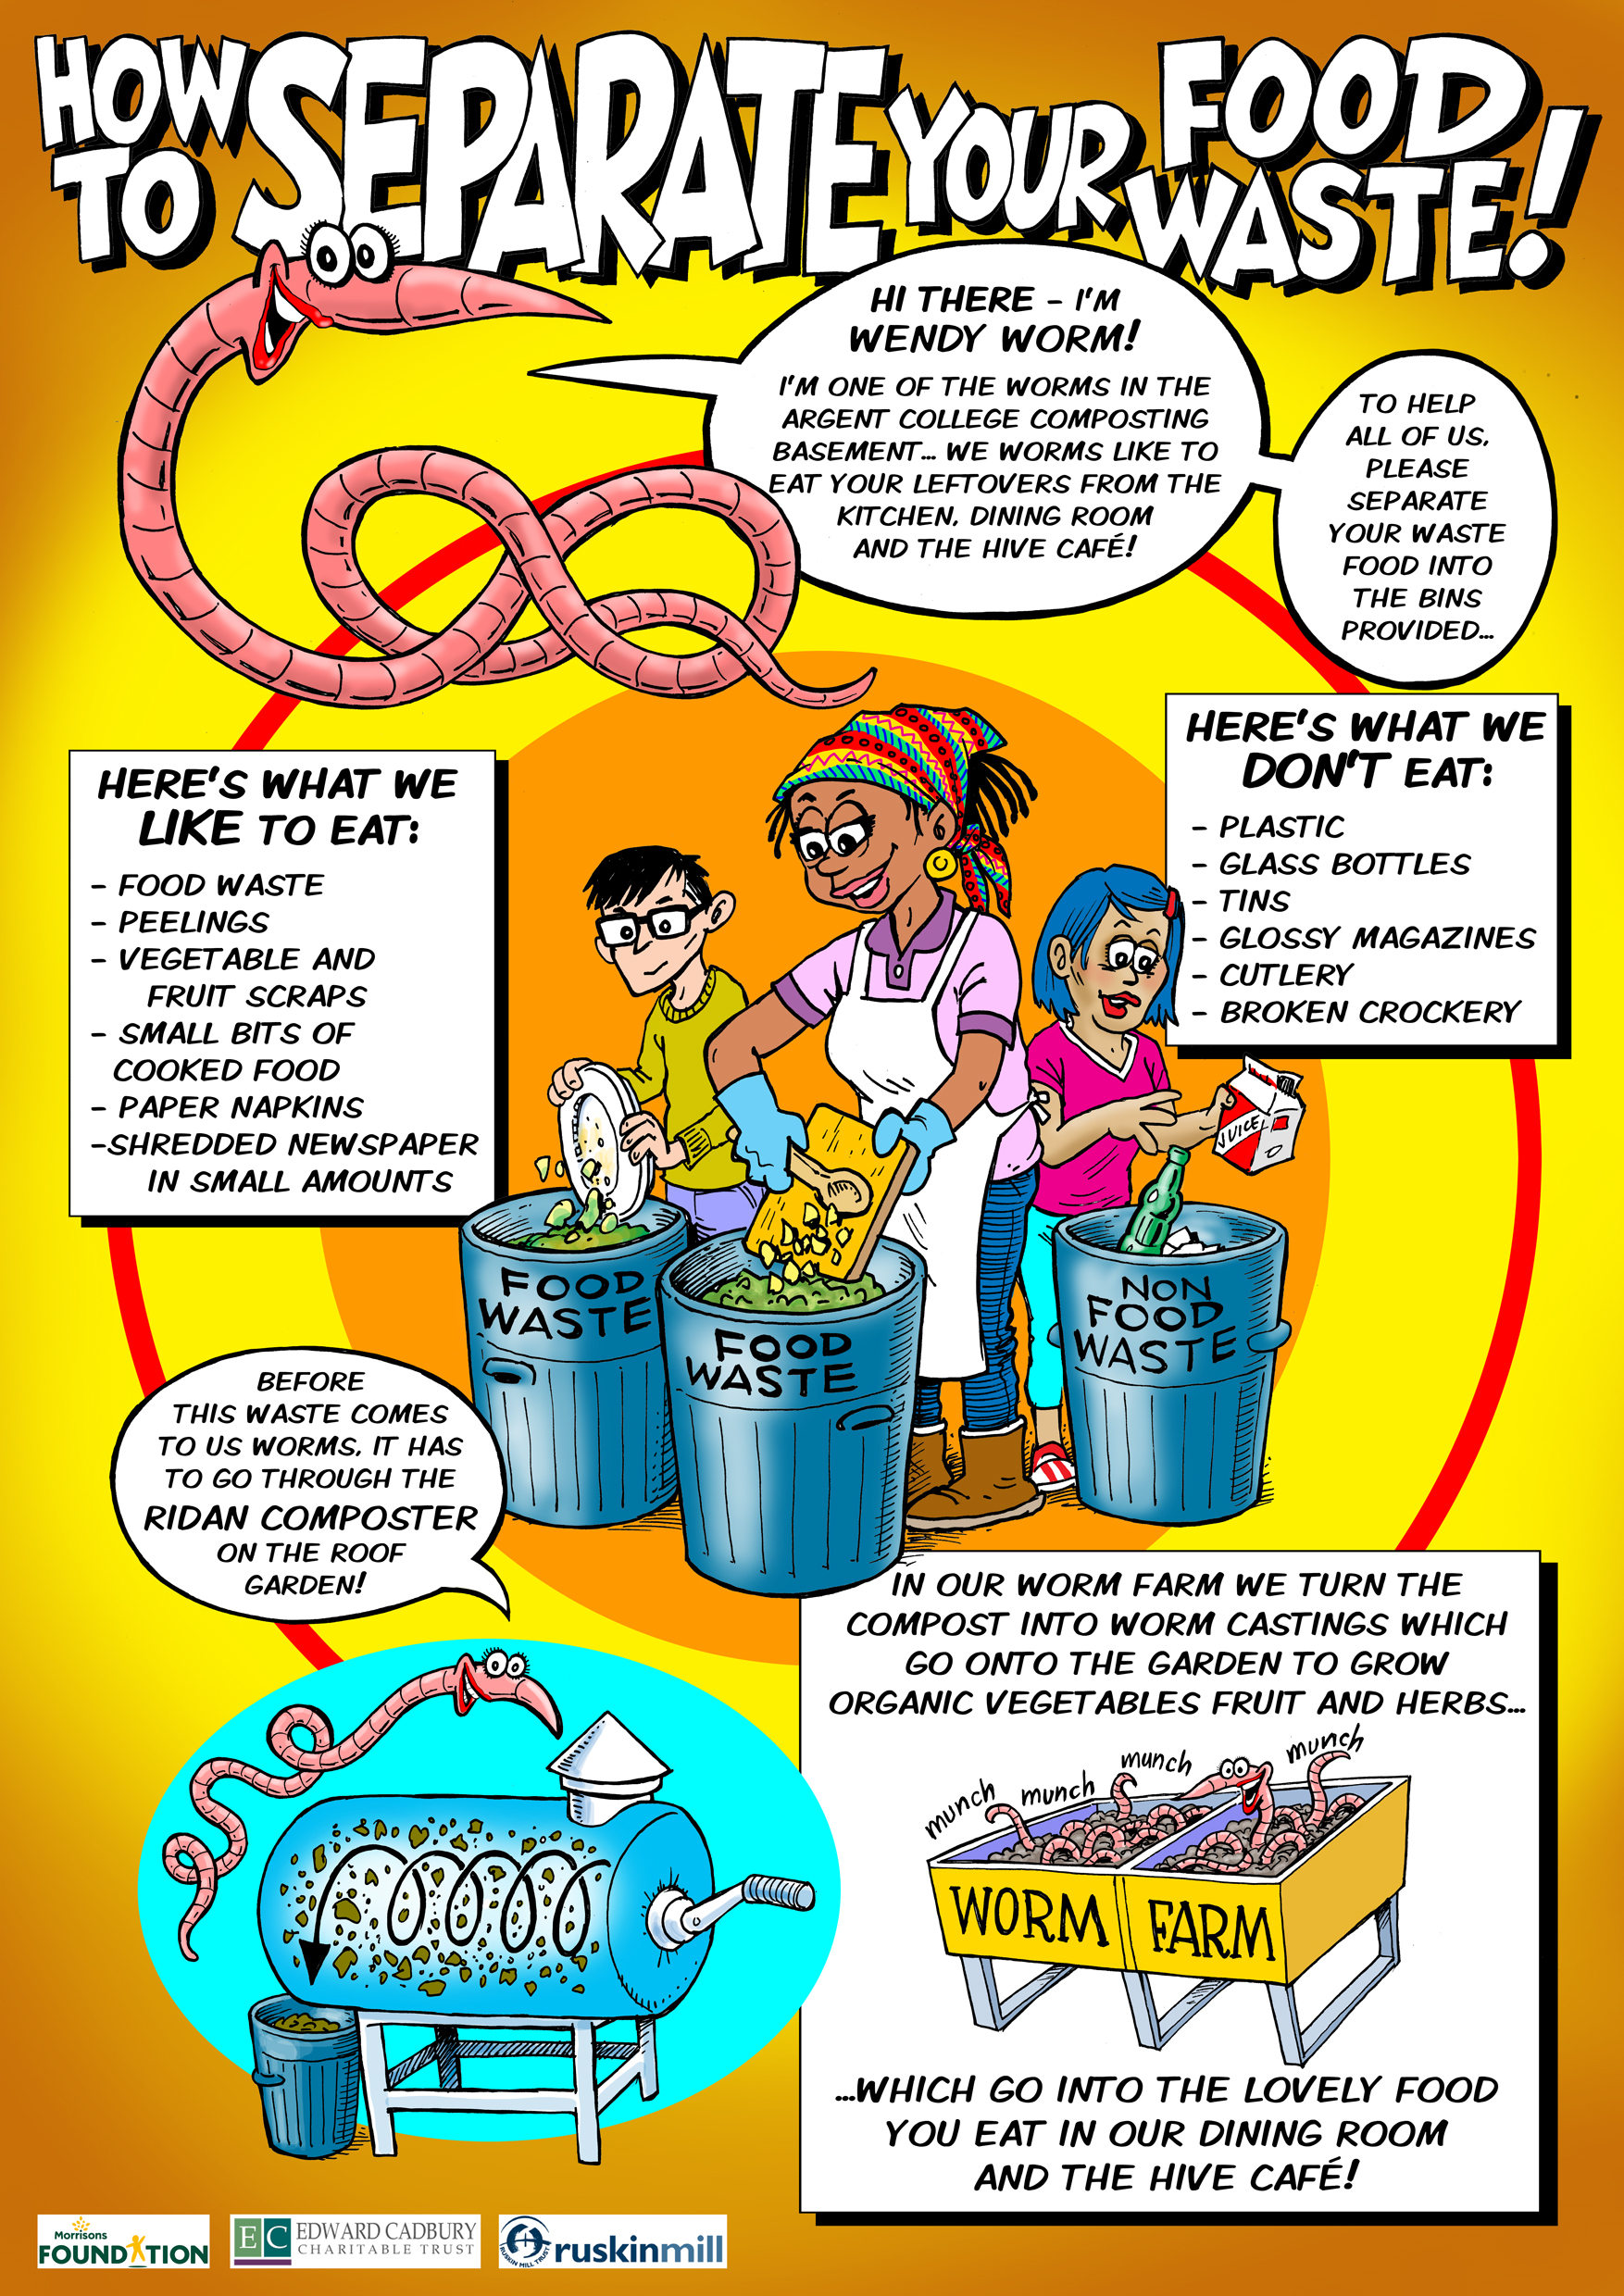 Seperating food waste poster